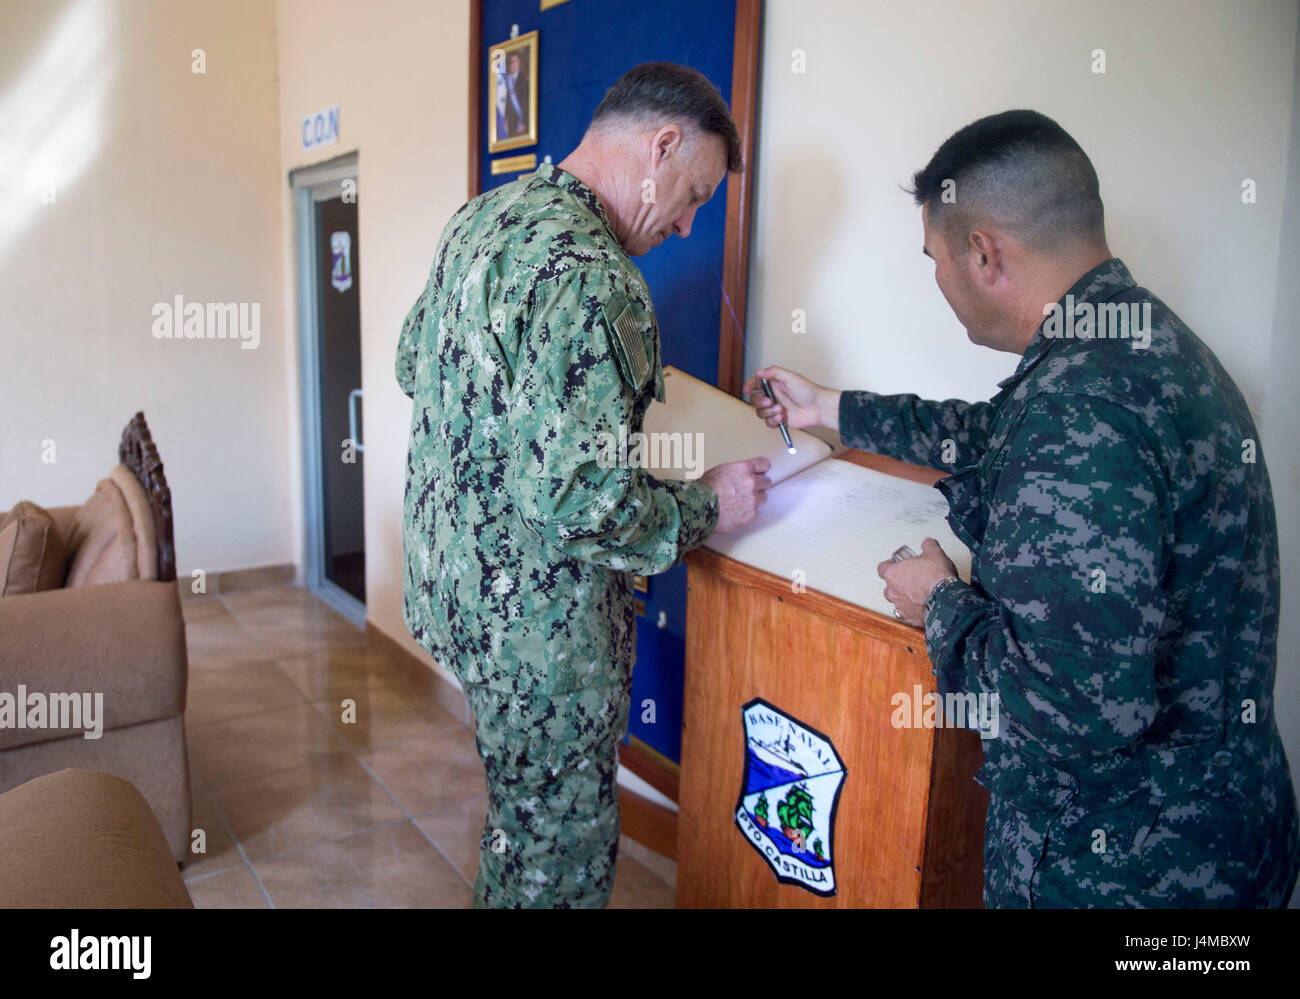 170223-N-YL073-074 TRUJILLO, Honduras (Feb. 23, 2017) – Rear Adm. Sean S. Buck, Commander U.S. Naval Forces Southern Command/U.S. 4th Fleet (USNAVSO/FOURTHFLT), signs the guest book while visiting the commander of Naval Base Puerto Castilla, Honduras, in support of Continuing Promise 2017’s (CP-17) visit to Trujillo, Honduras. CP-17 is a U.S. Southern Command-sponsored and U.S. Naval Forces Southern Command/U.S. 4th Fleet-conducted deployment to conduct civil-military operations including humanitarian assistance, training engagements, and medical, dental, and veterinary support in an effort to Stock Photo